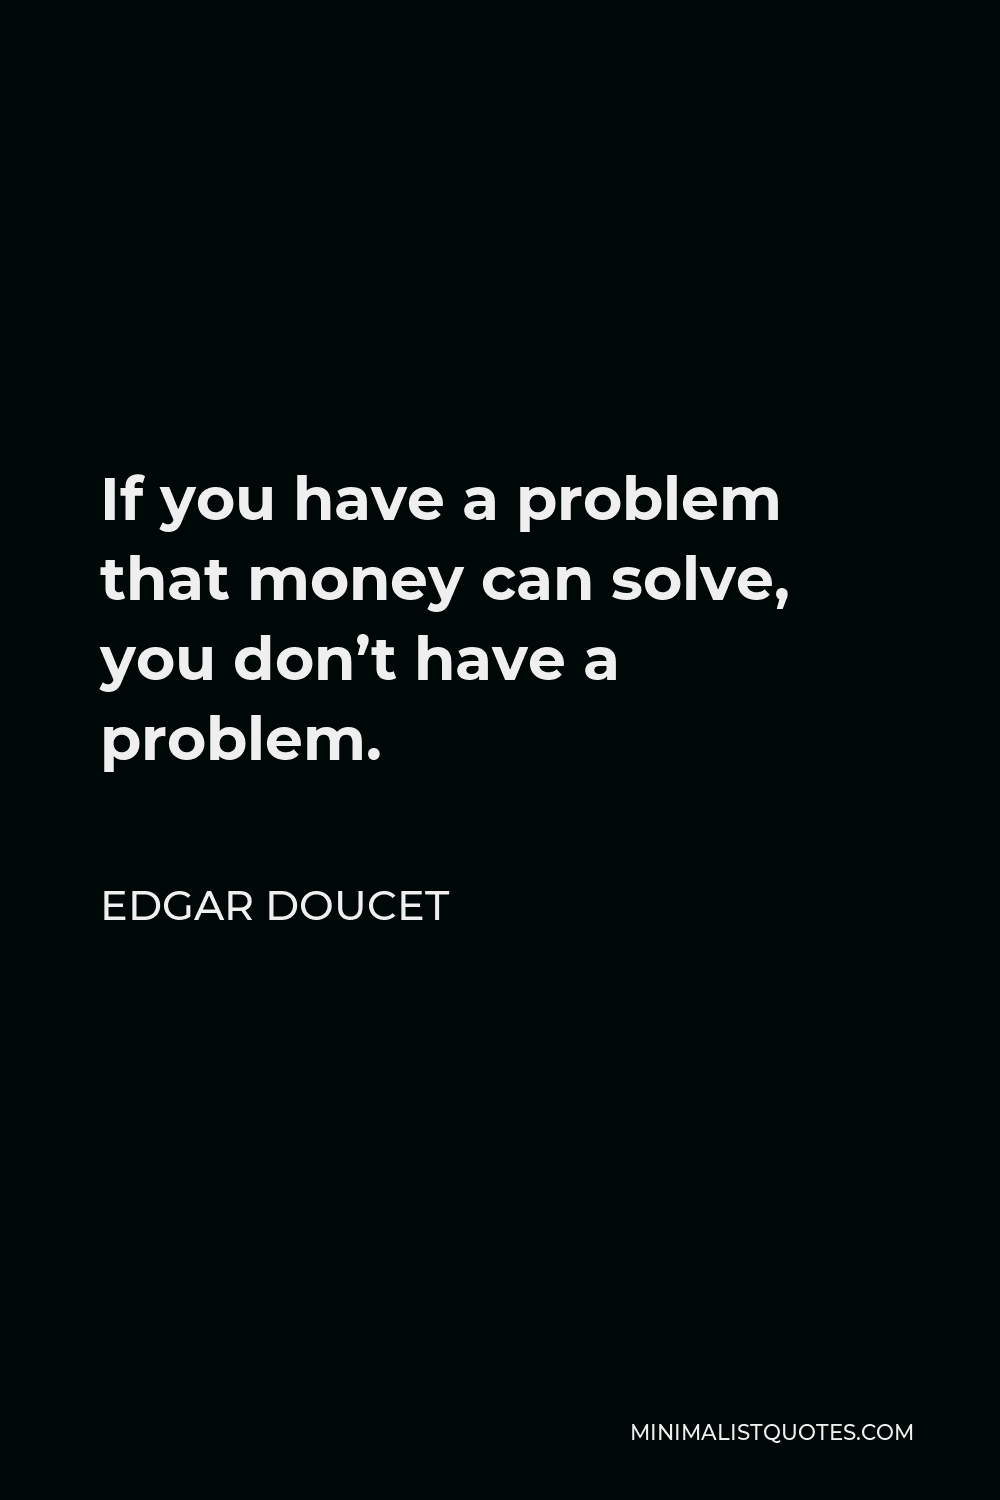 problems money can't solve